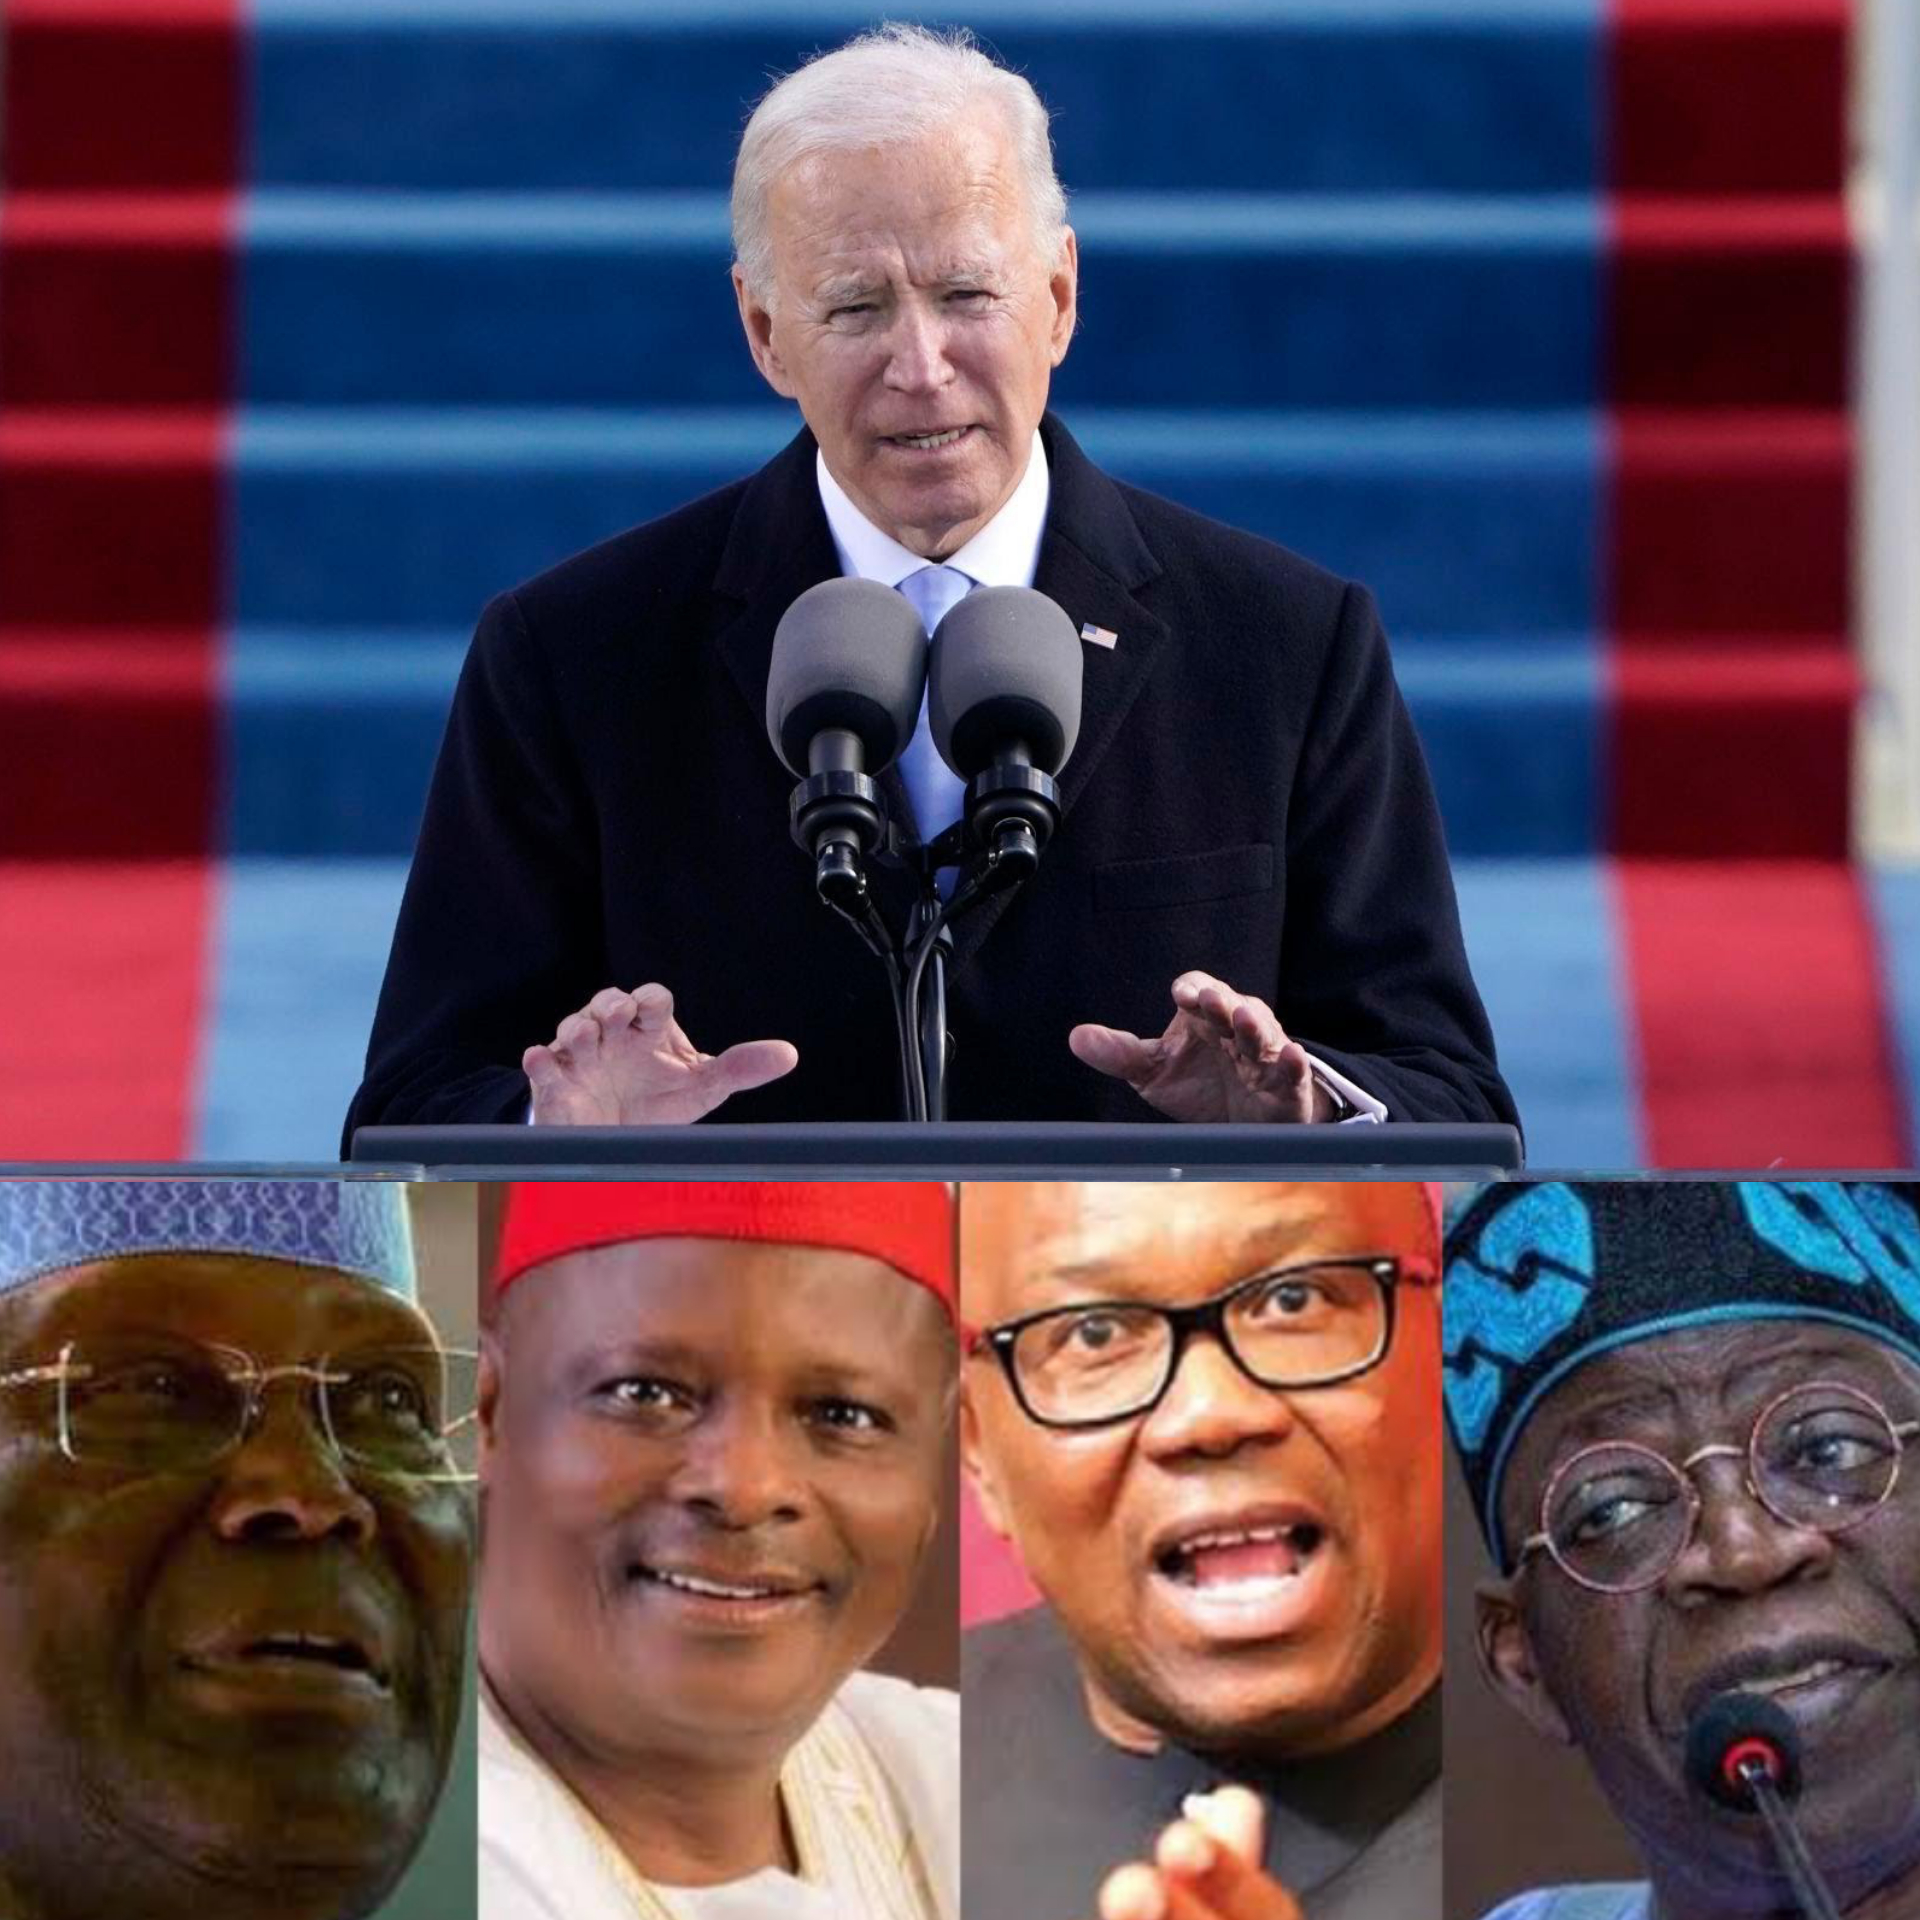 "All Nigerians deserve this chance to choose their future freely and fairly - Joe Biden releases statement on Nigeria?s upcoming Election